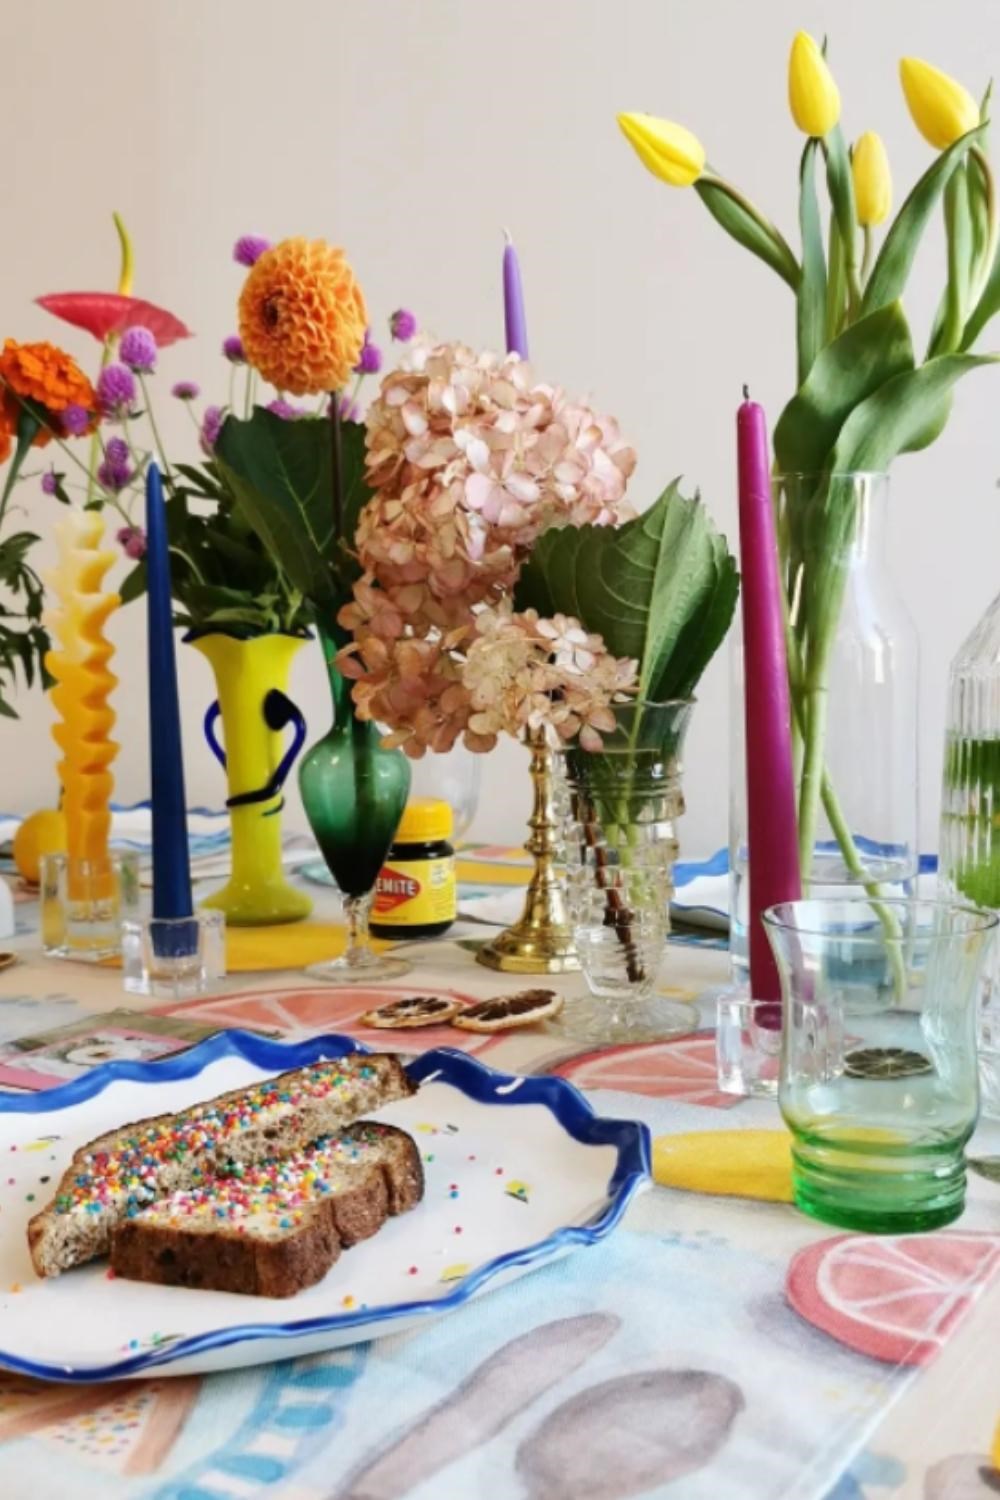 How to create a gorgeous Easter table | Better Homes and Gardens